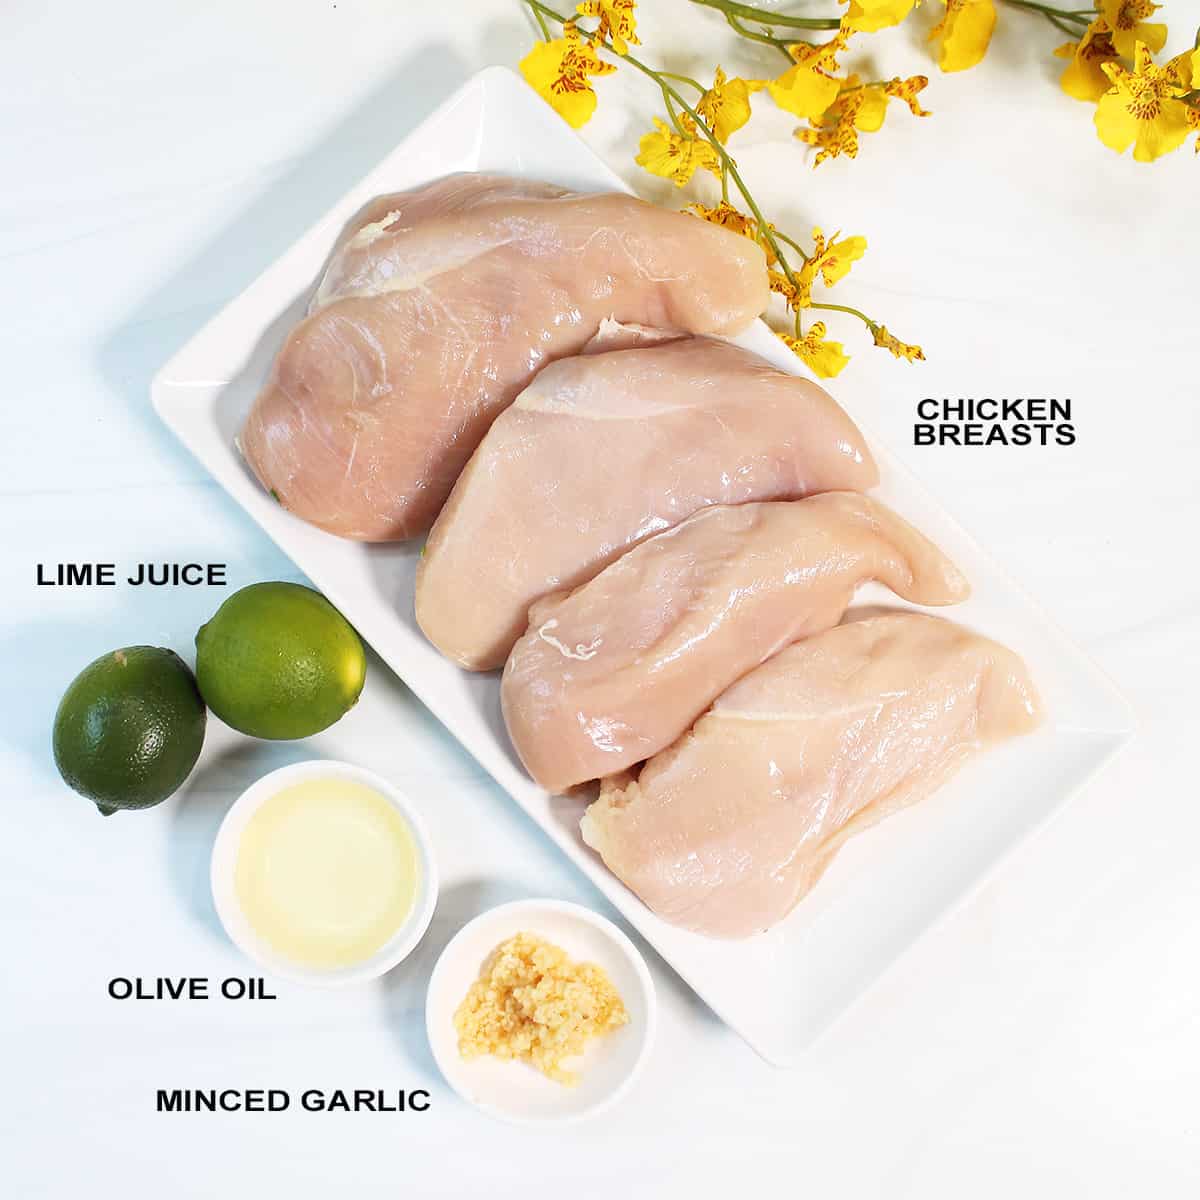 Ingredients for Grilled Chicken.